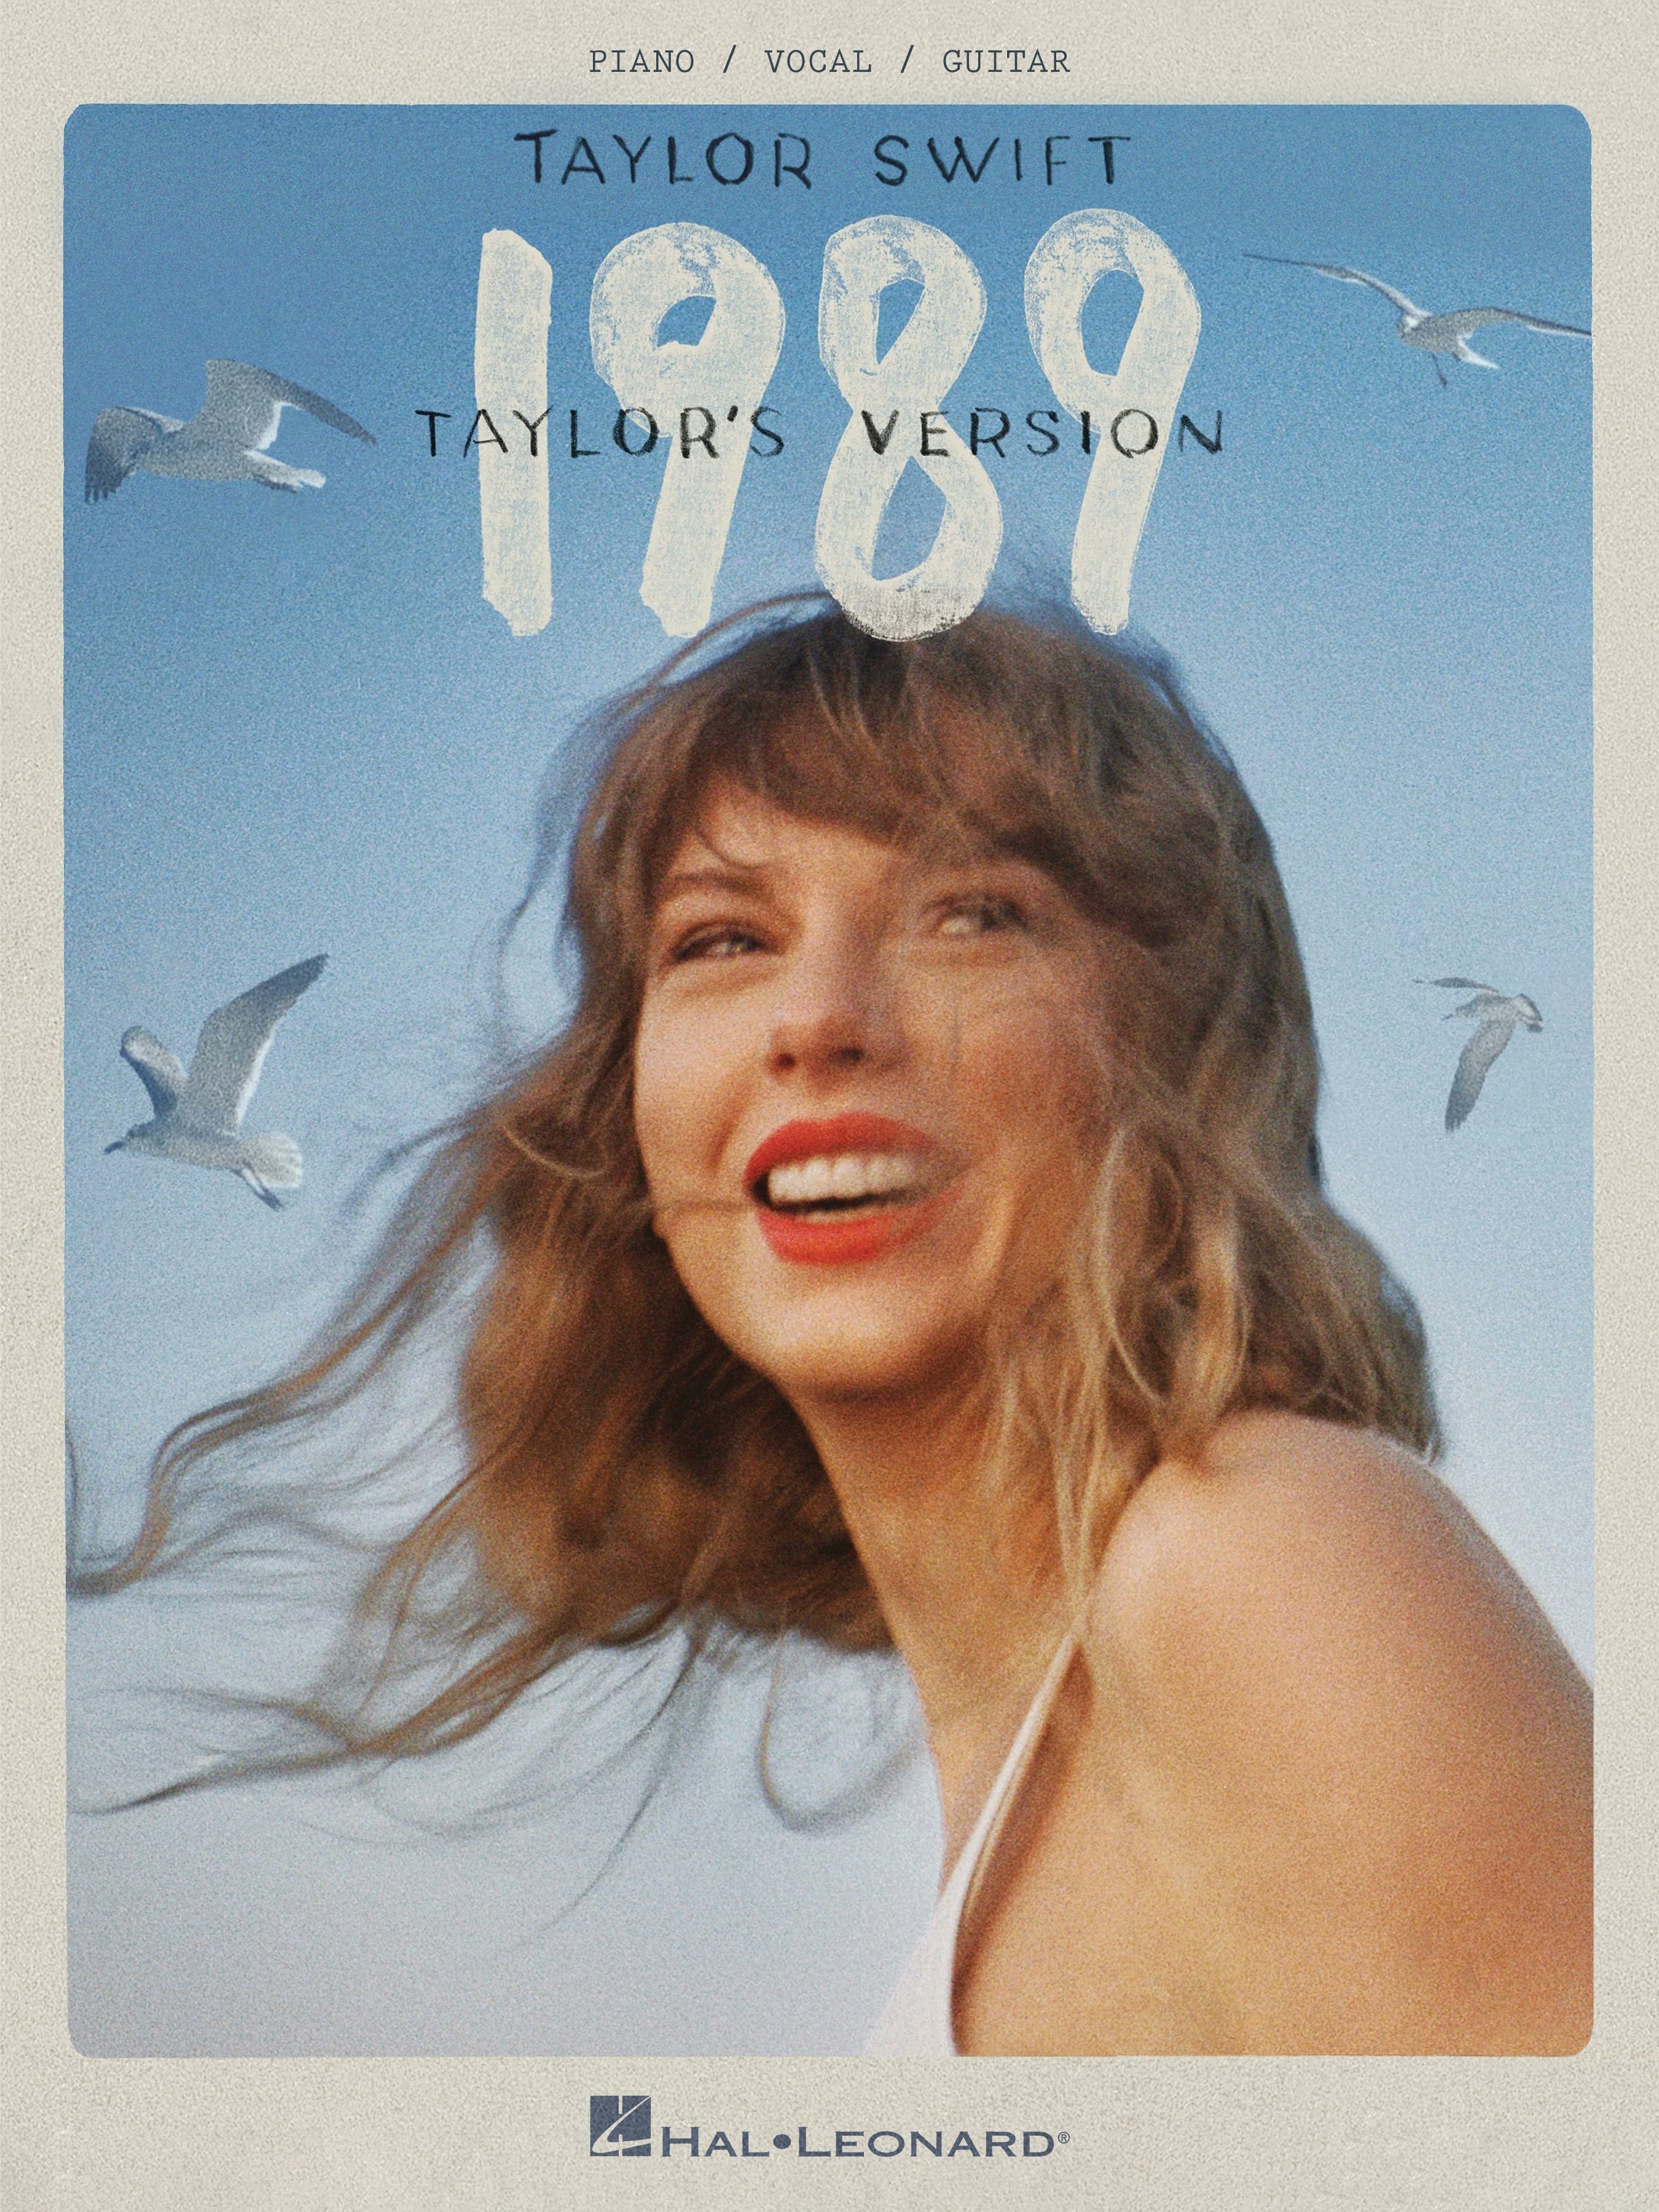 1989 (Taylor's Version) vocal sheet music cover